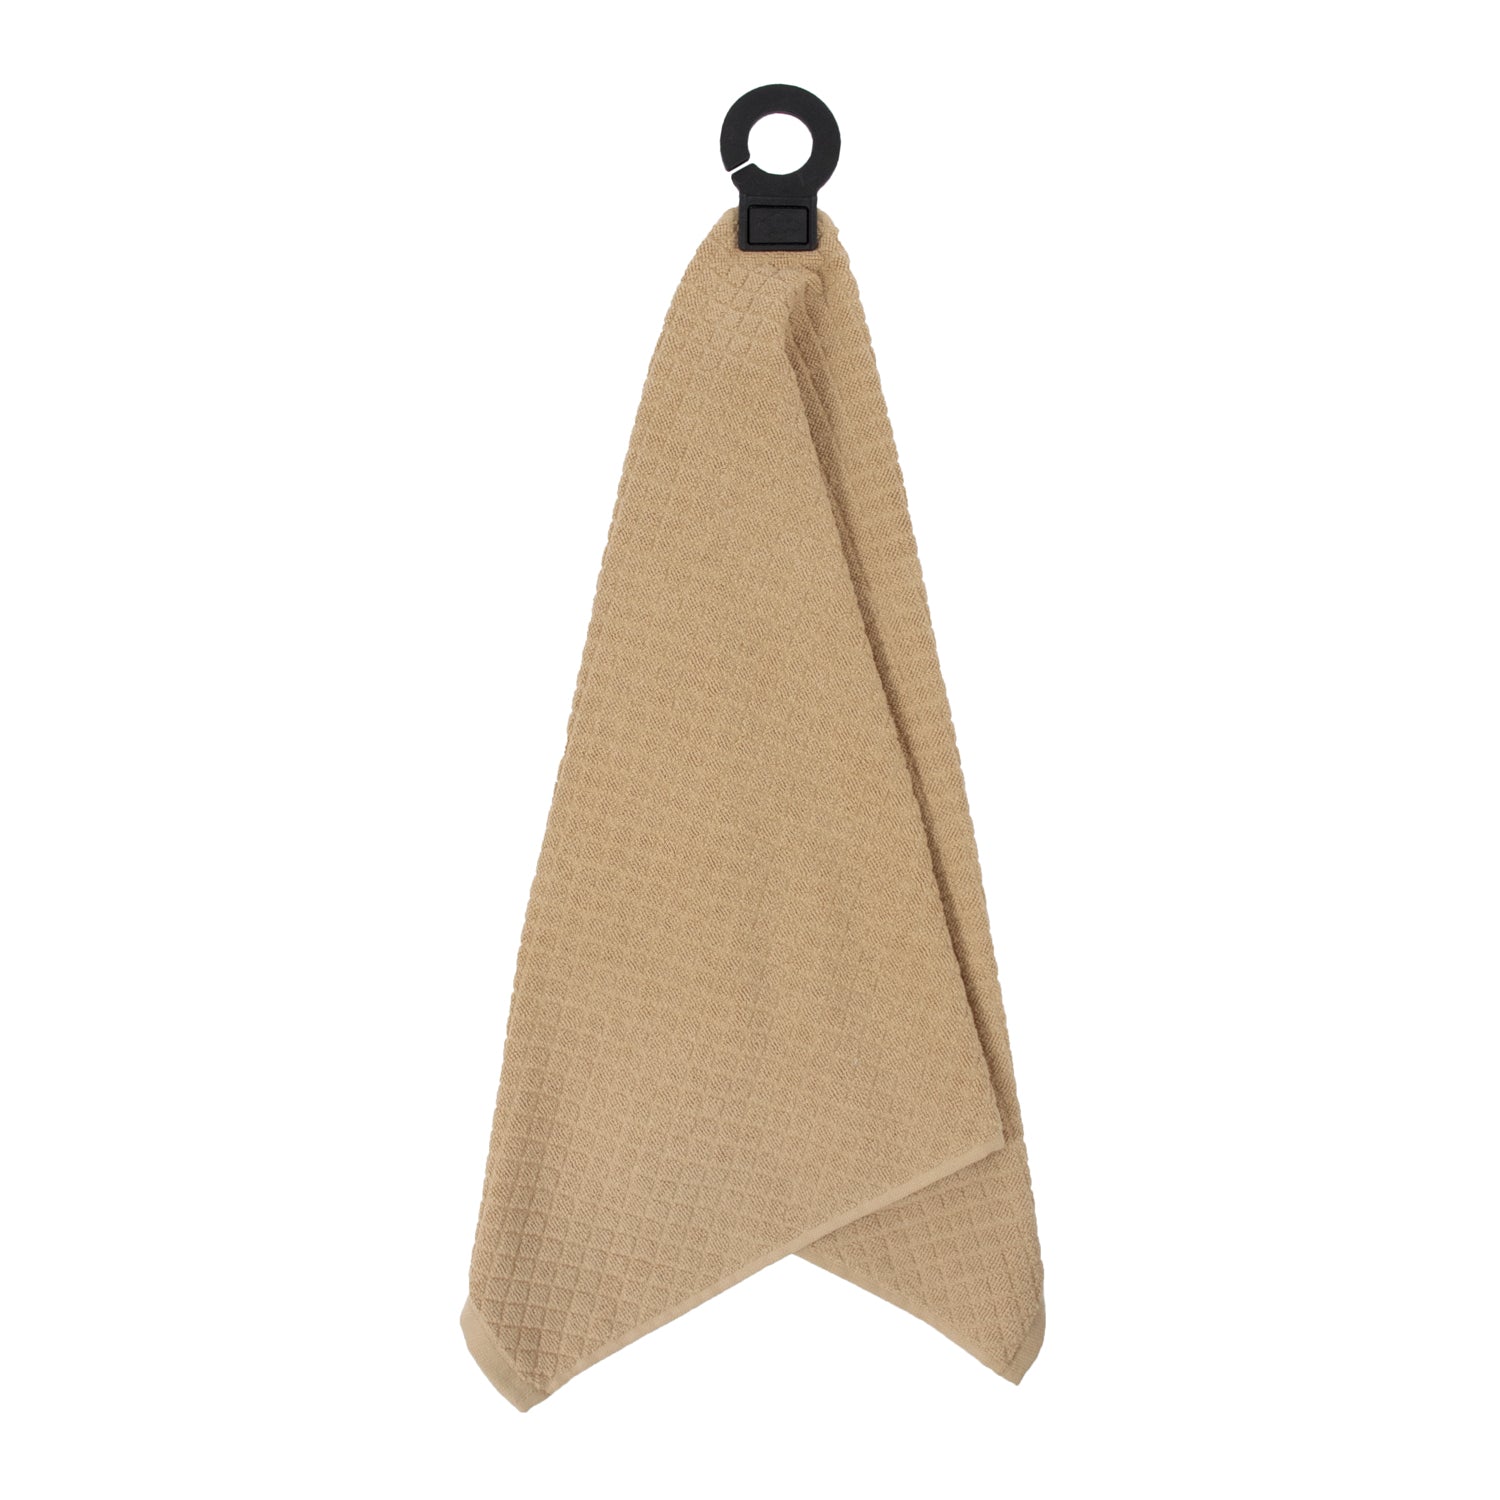 Ritz Hook and Hang Woven Kitchen Towel, Set of 2 - Biscotti